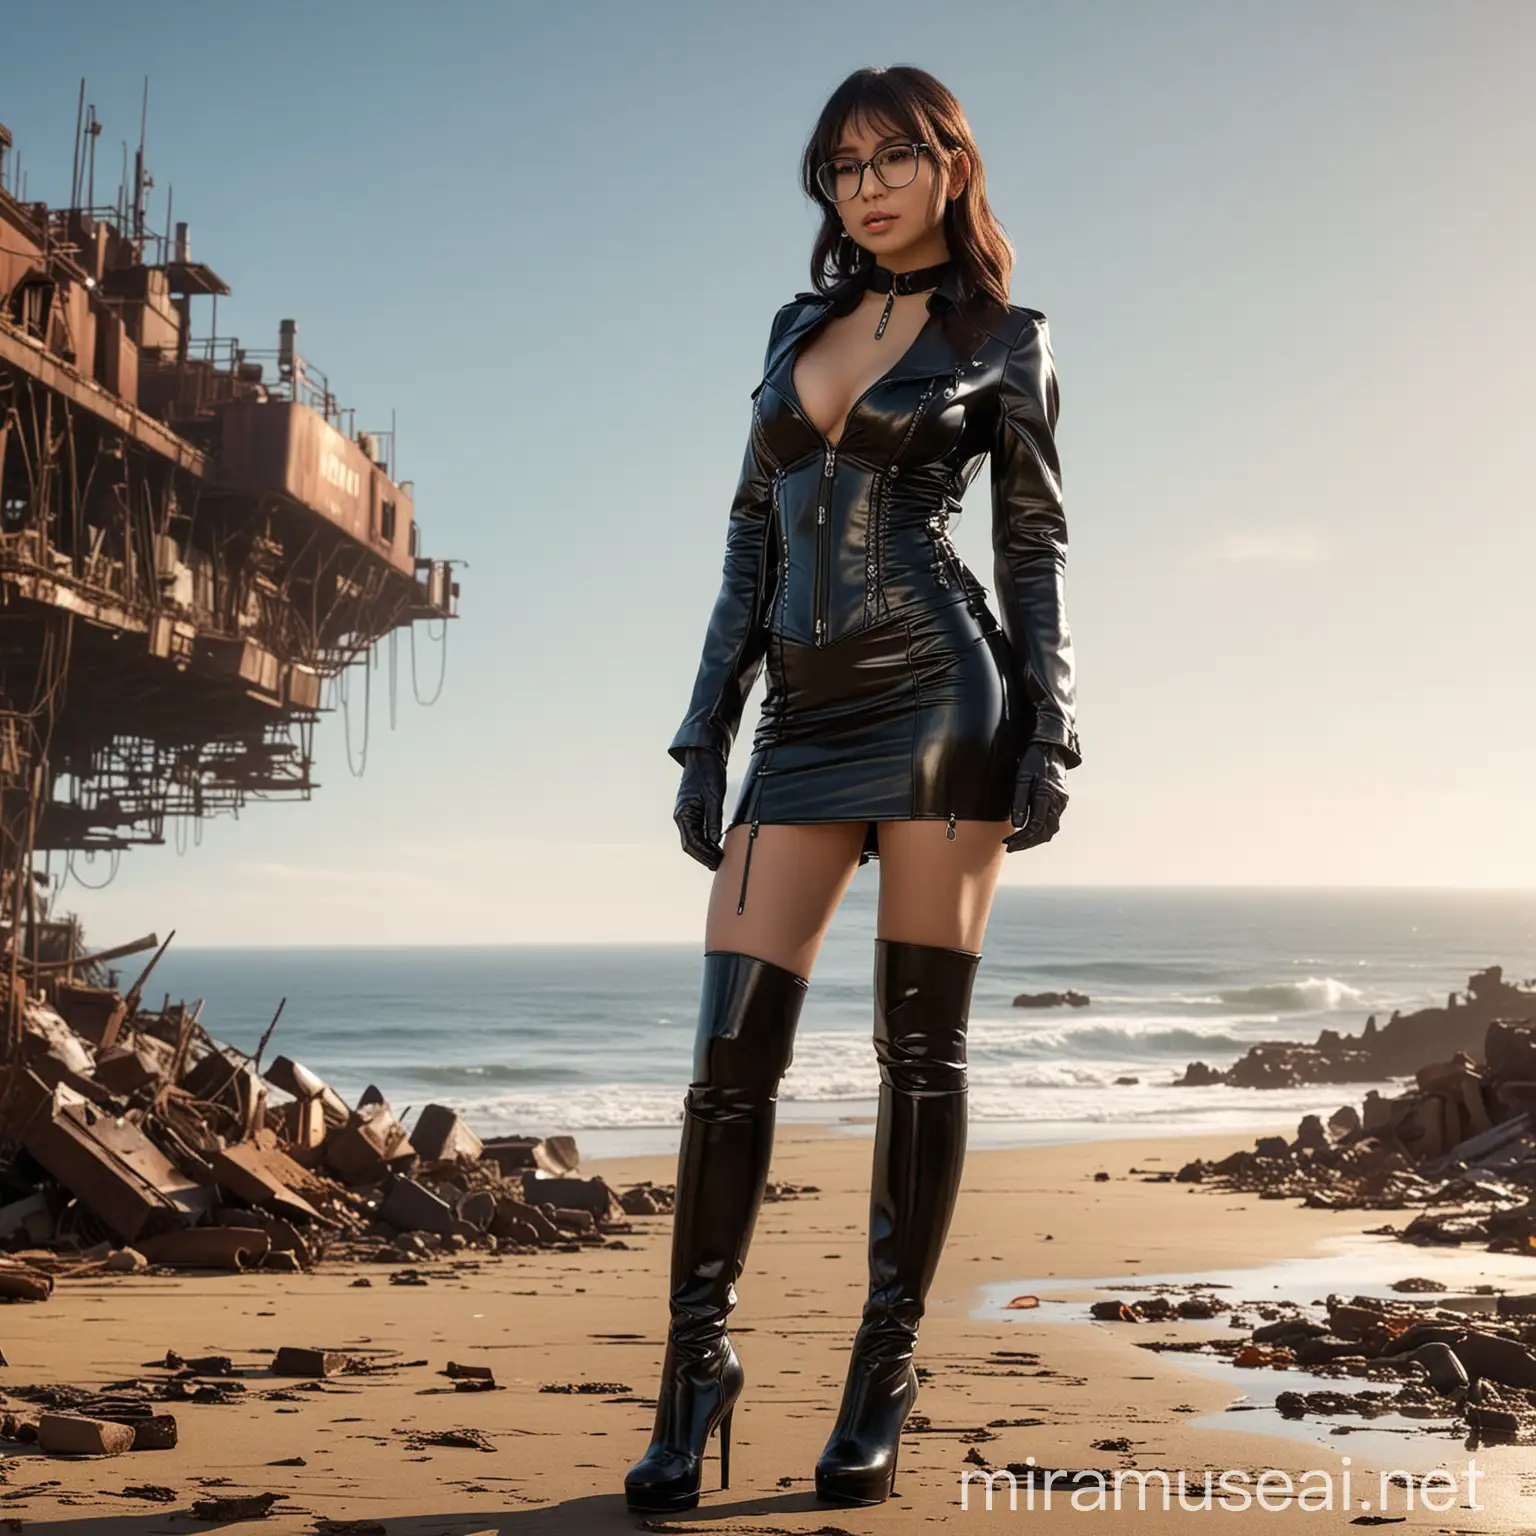 ichard, a man was playing Fallout on his PC when when he pressed the button he appeared in the game in Santa Monica State Beach he transformed into a woman Mia Khalifa's daughter with Hitomi Tanaka, wearing a latex corset,(( latex miniskirt)) ,((high heel boots above the thigh)), long latex gloves sleeveless(( open prickly jacket)) large round glasses and latex earrings, Fallout World Steampunk, Aiko has a striking appearance, combining latex elements from her two famous mothers. She inherited Mia Khalifa's expressive and captivating eyes, while her curvaceous and voluptuous figure is reminiscent of Hitomi Tanaka. Her hair is long and silky, with a dark brown tone that stands out in the sun. She has an imposing and confident presence, but also radiates an aura of elegance and charm with a beautiful smile, as she walks in a sexy way towards the camera showing her entire body , in a setting destroyed by radiation, all rusty and full of metals, with the sea in the background,,epic masterpiece, cinematic experience, 8k, fantasy digital art, HDR, UHD. This contrast between the fantastical character and the more traditional color scheme and elements gives the piece an intriguing narrative quality. Model Is crouched down looking at camera, with one leg extended outwards toward the camera. old junkyard,,((wearing a latex backpack))